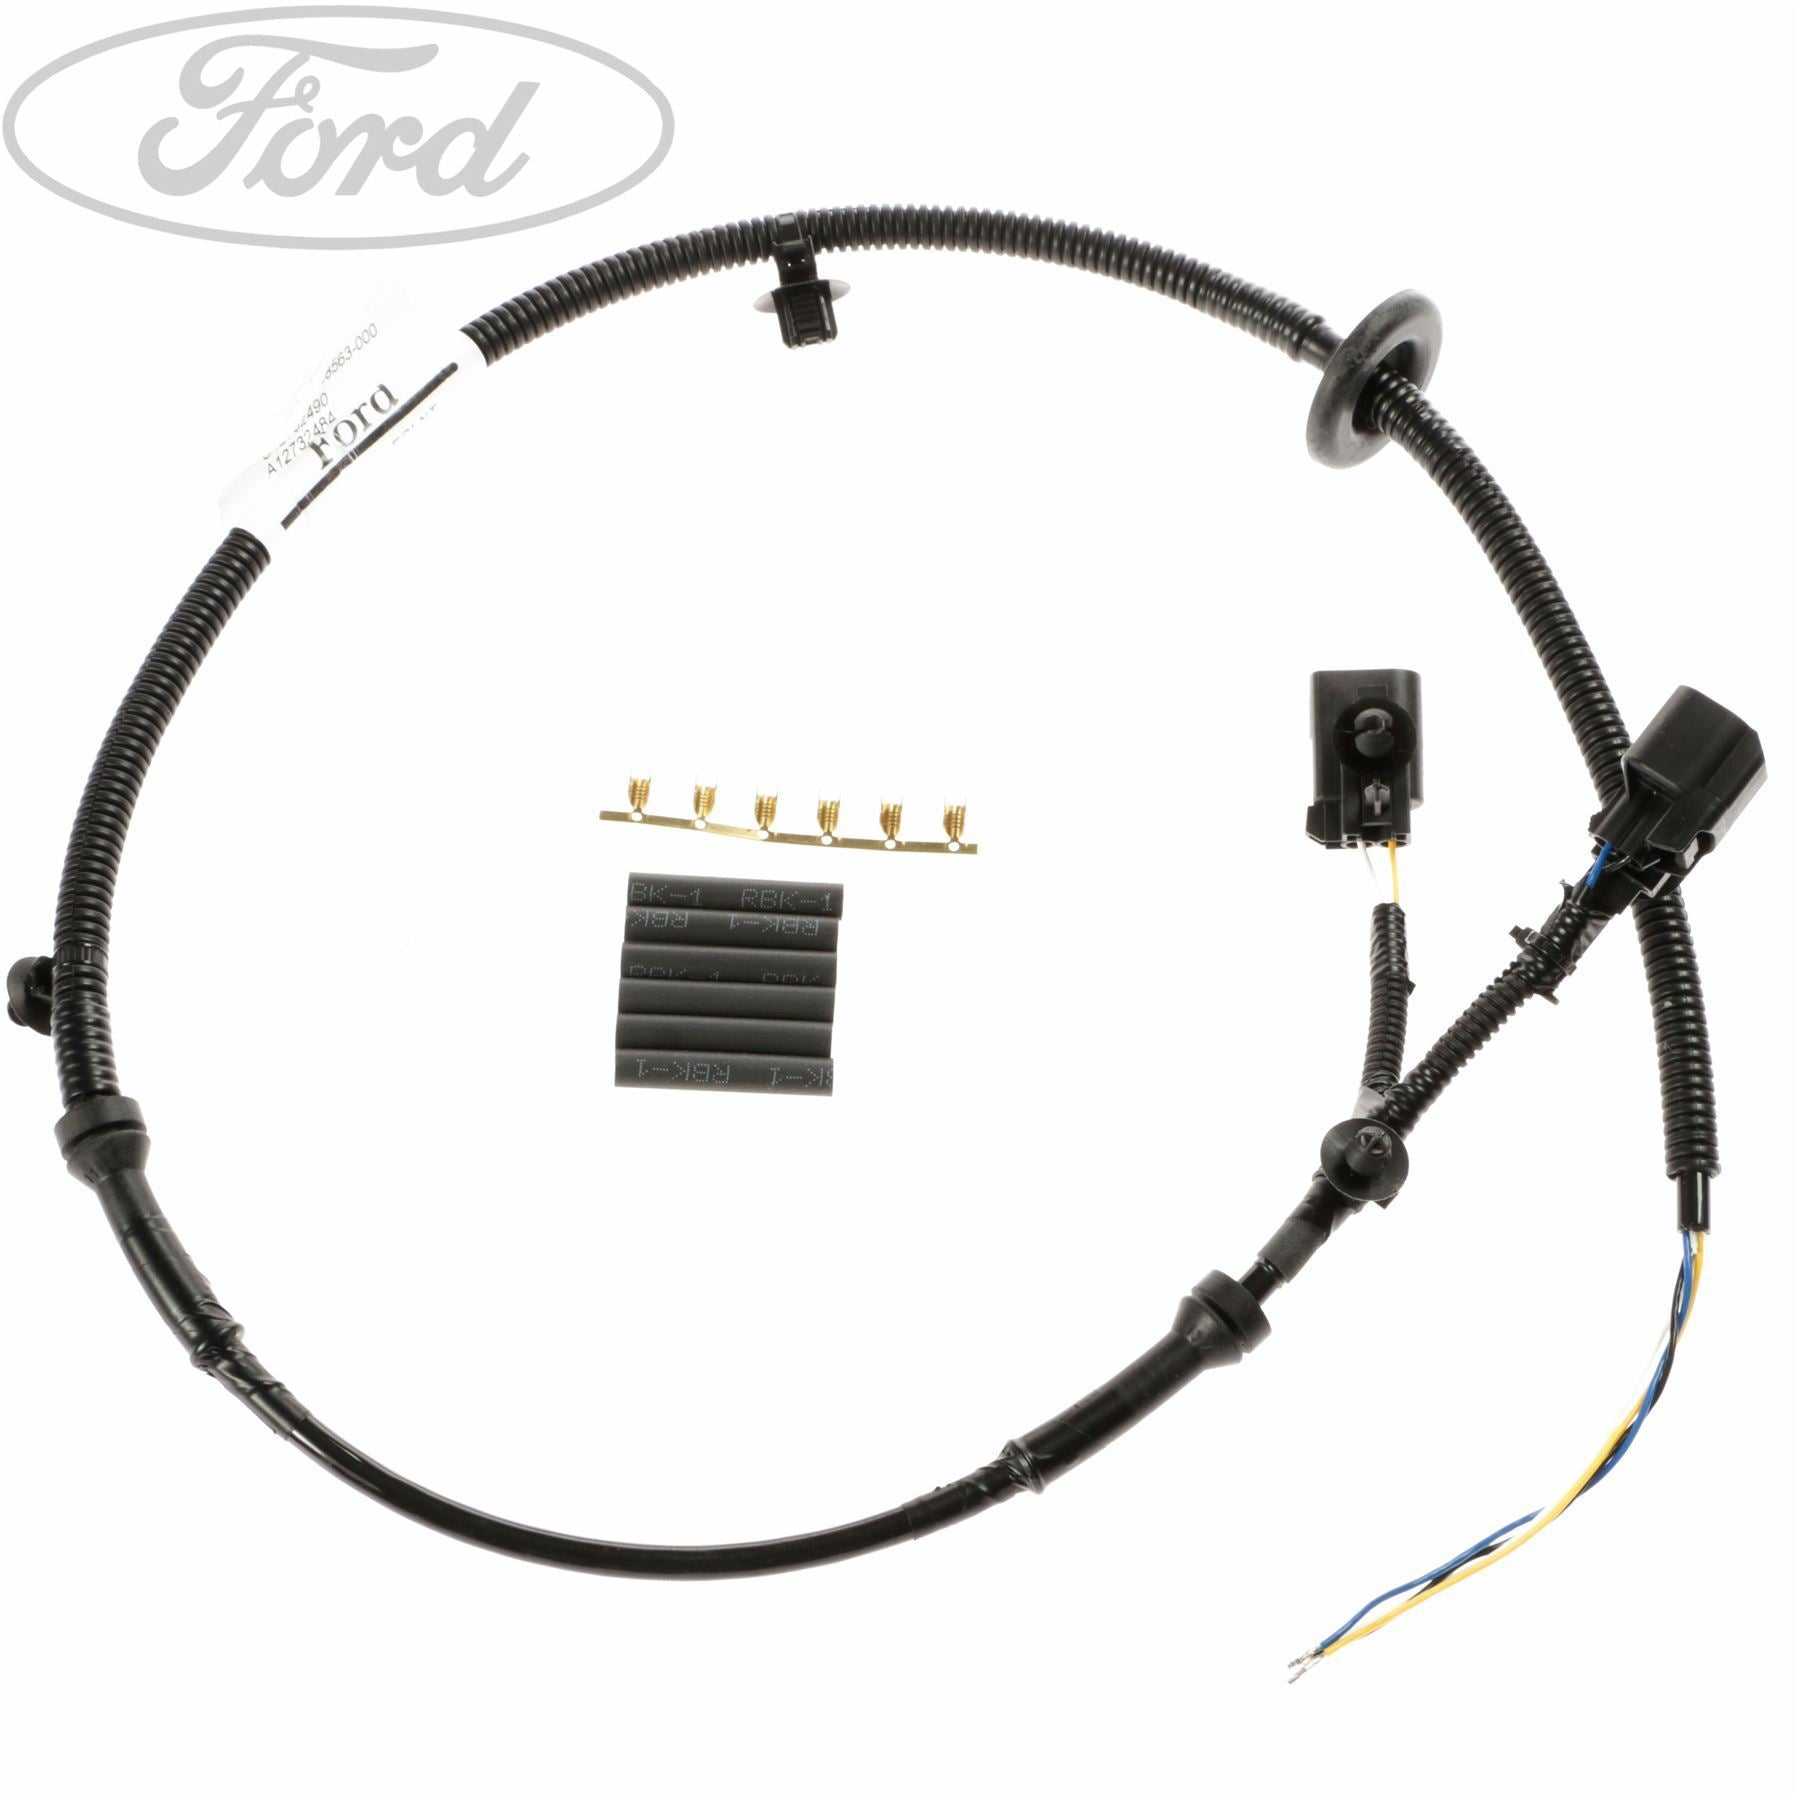 Ford, Wires